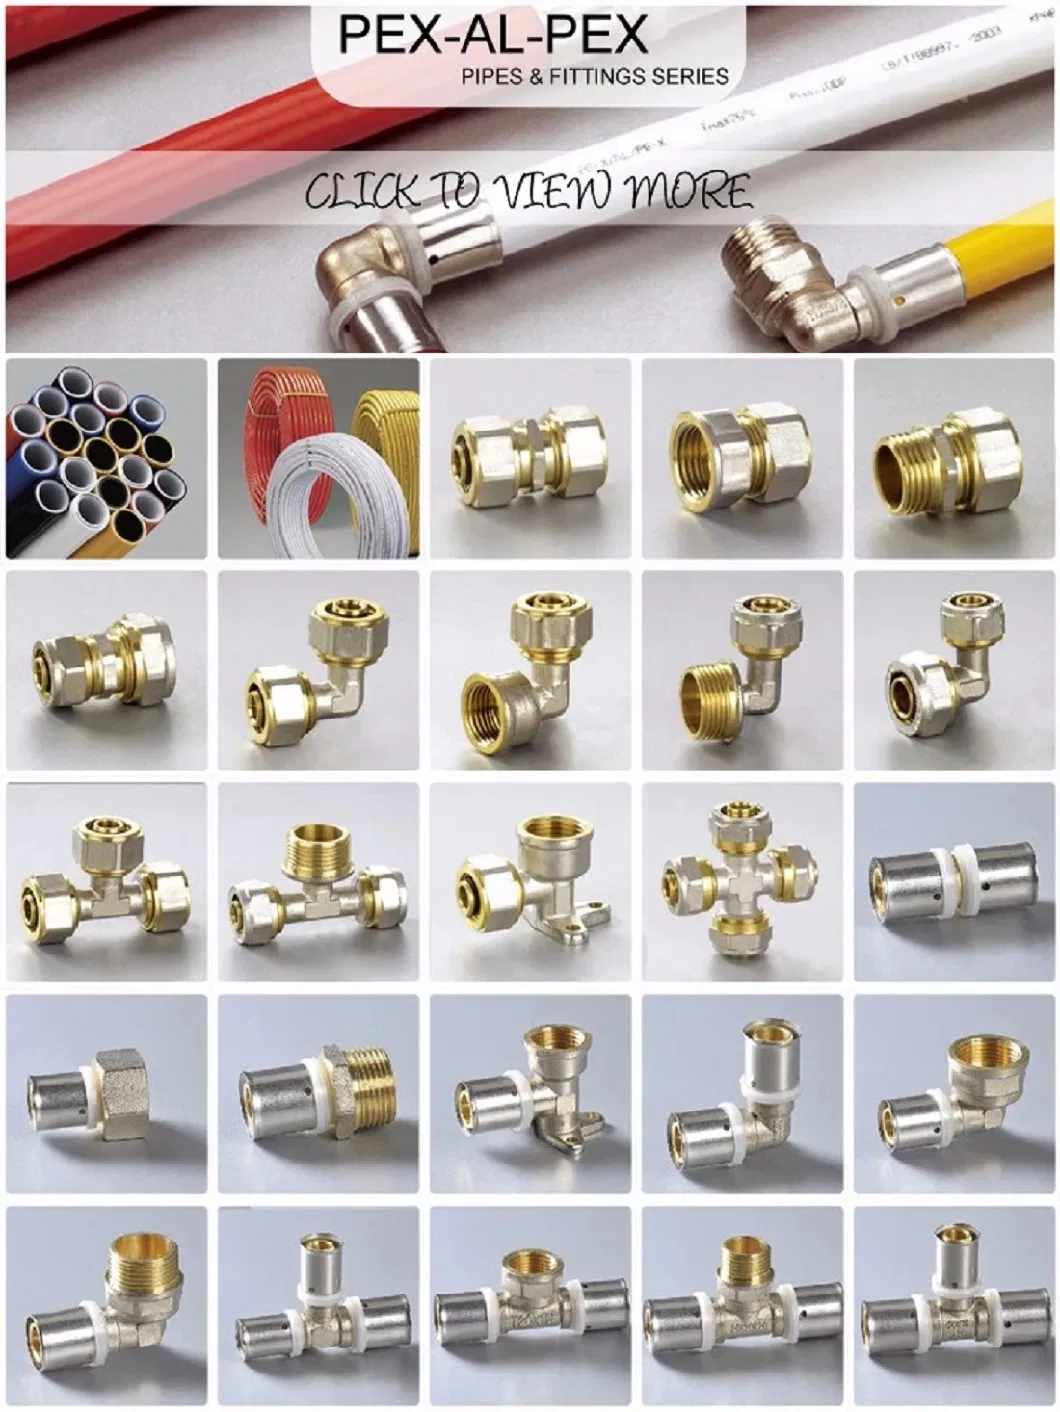 Equal Elbow Thread Connector for Pex-Al-Pex Pipe Compression Brass Fittings